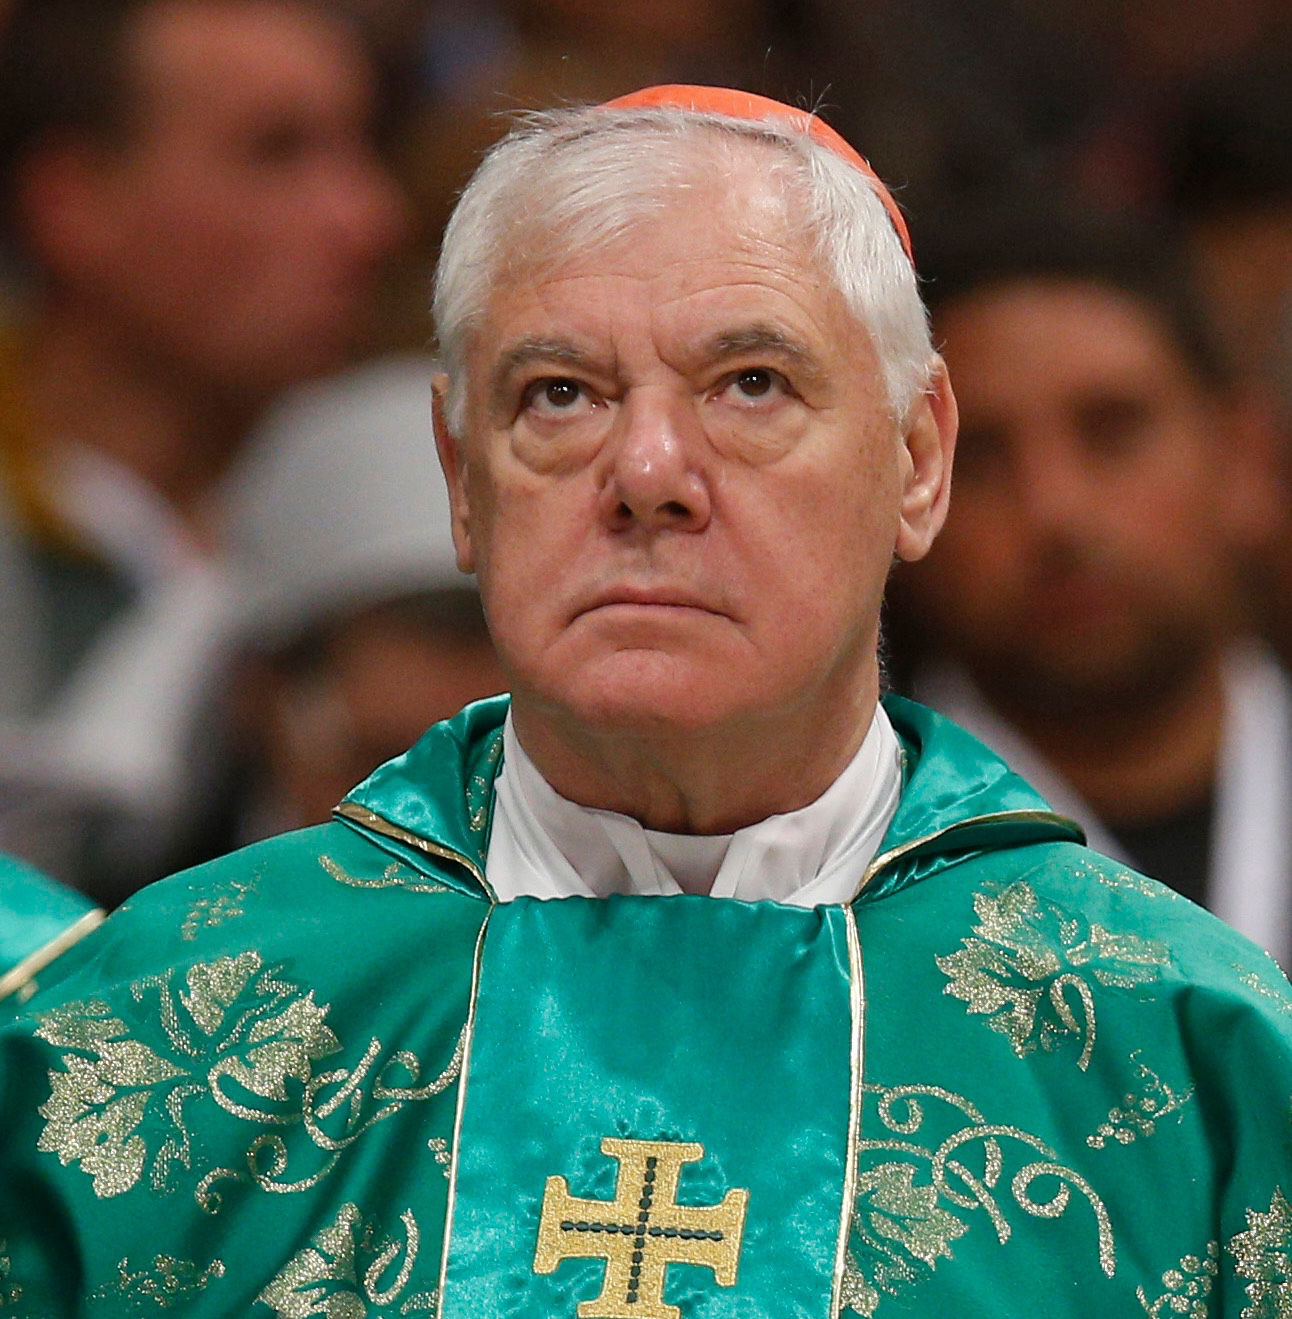 Cardinal: No one has right to demand a pope's resignation